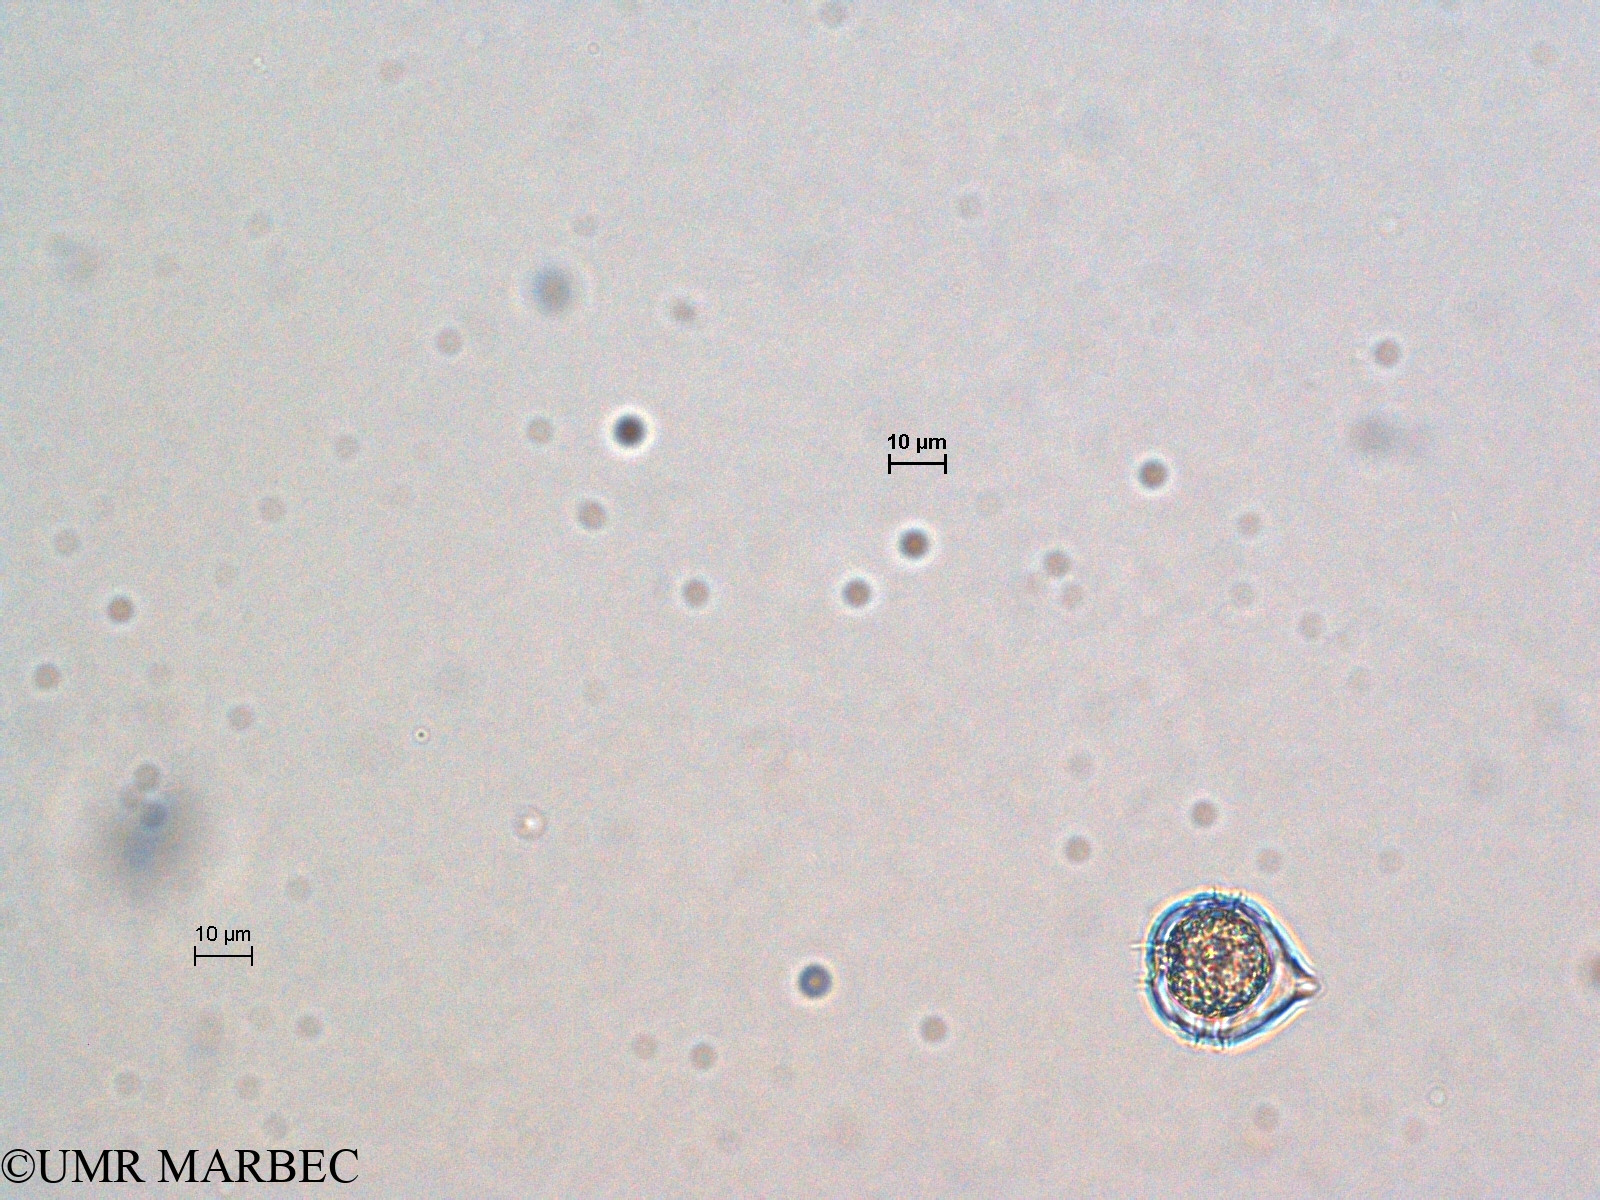 phyto/Scattered_Islands/all/COMMA April 2011/Protoperidinium sp7 (5)(copy).jpg